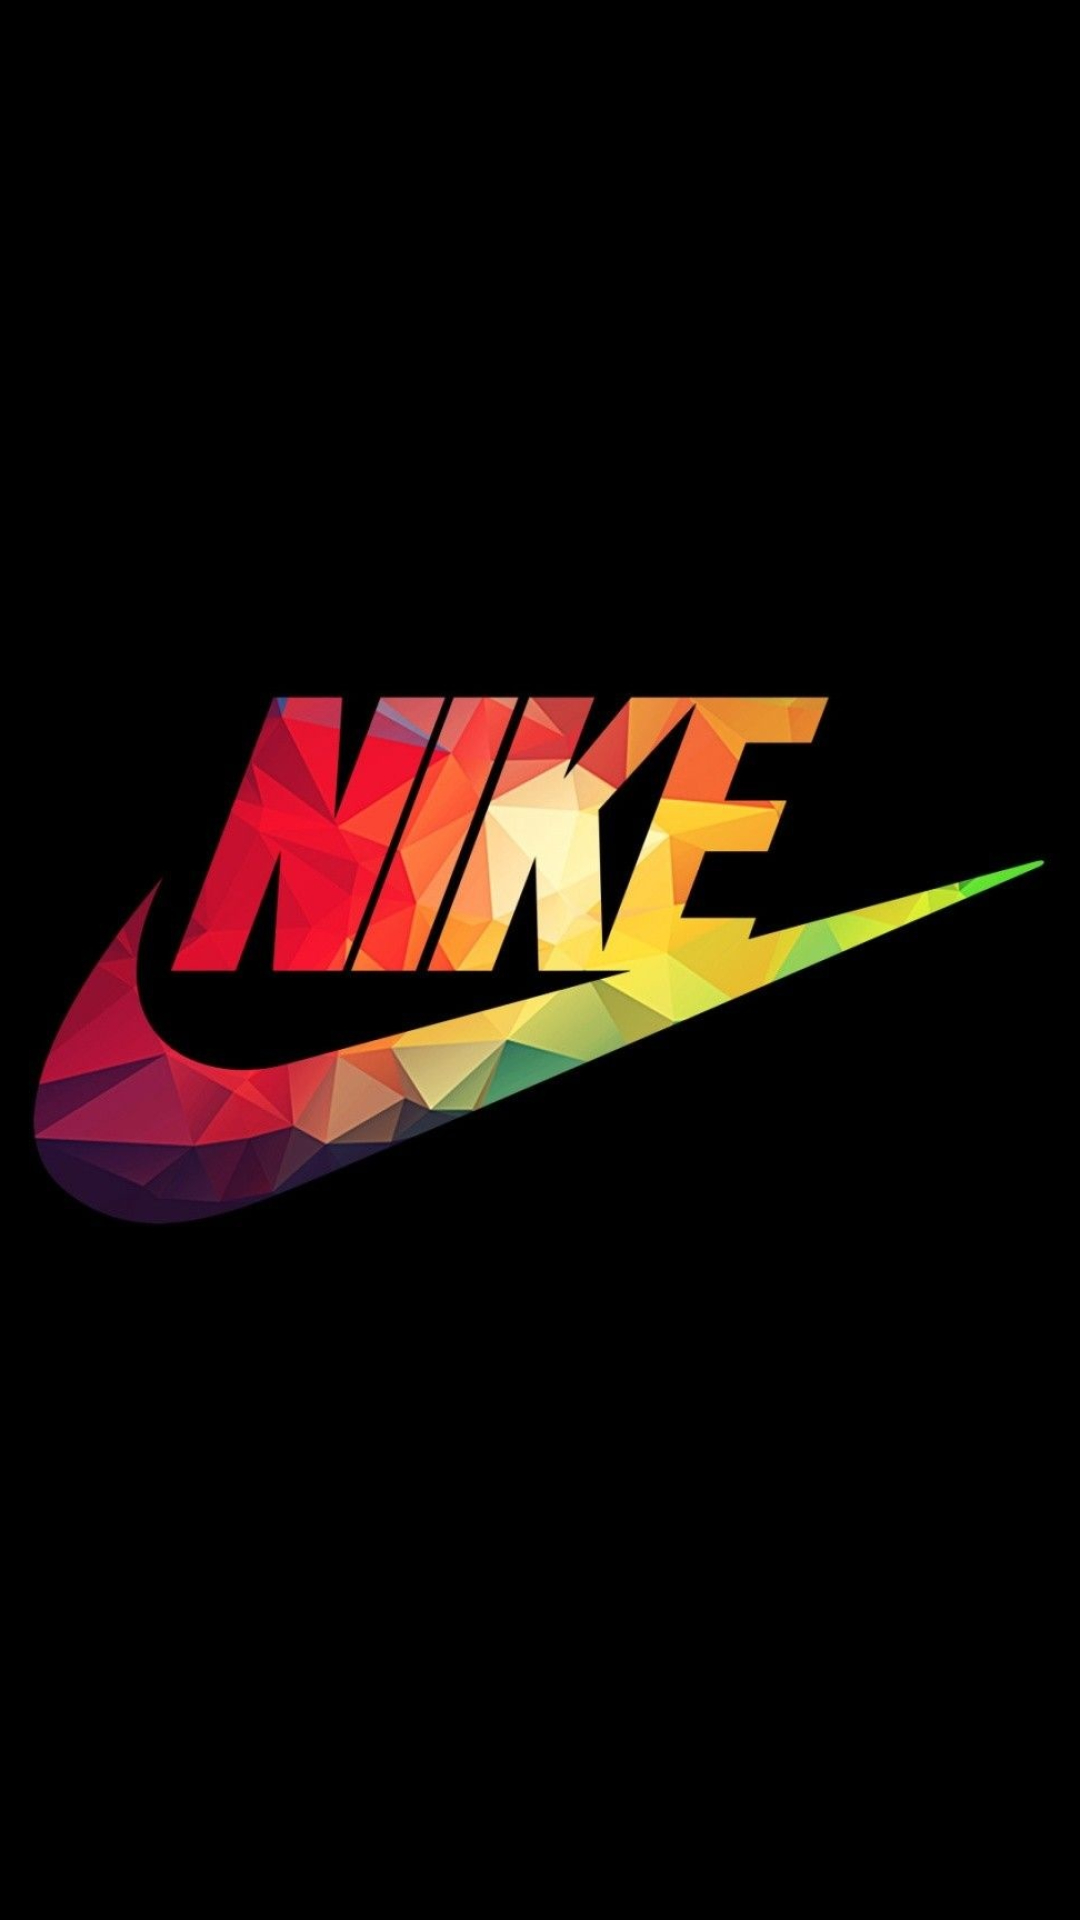 Nike HD phone wallpapers, Quality backgrounds, High-definition images, Mobile wallpaper, 1080x1920 Full HD Phone